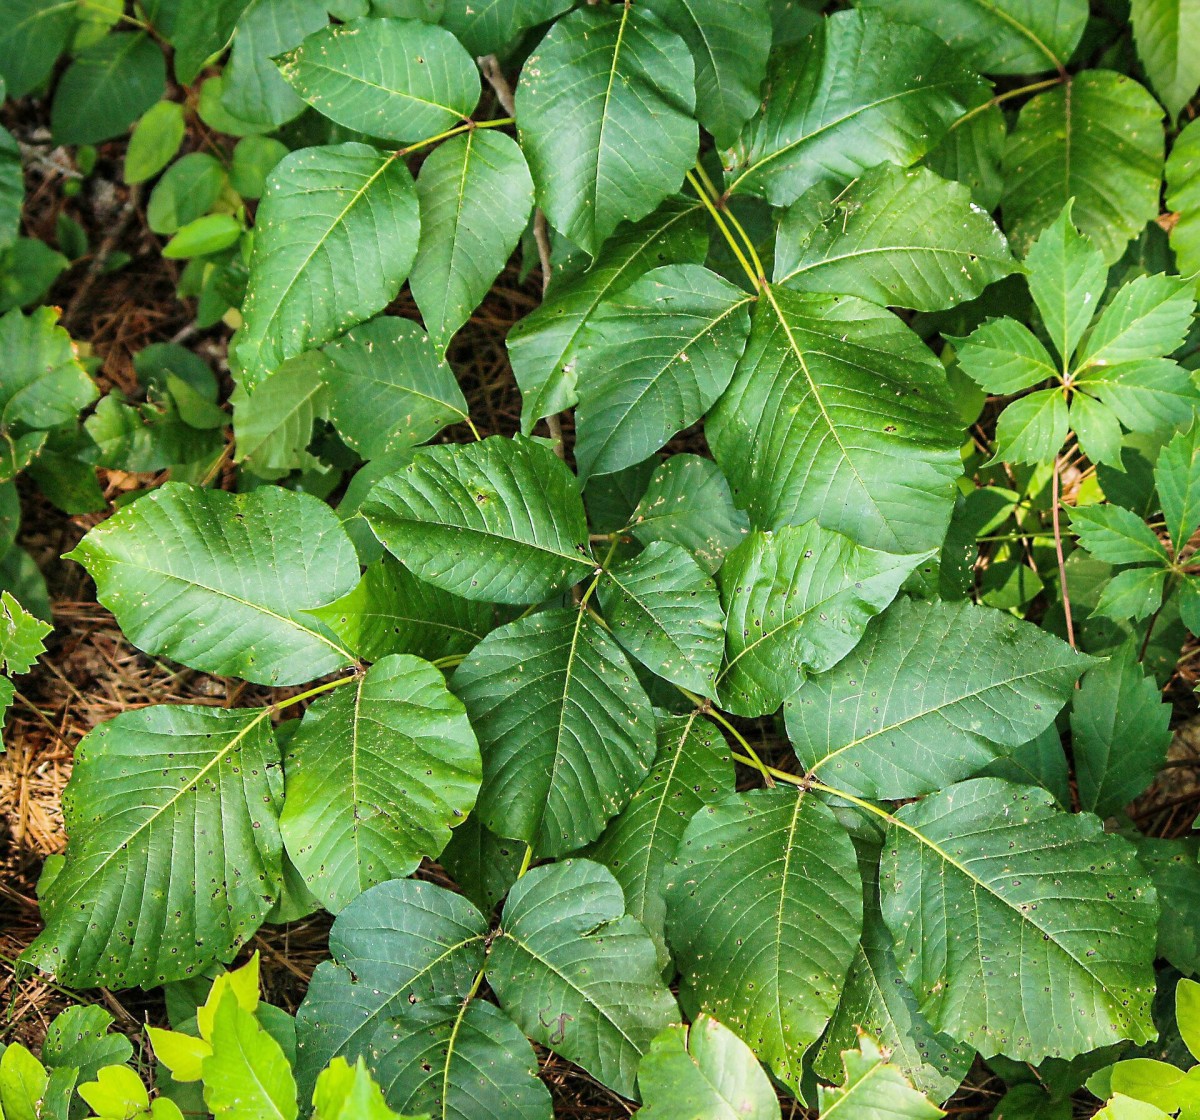 Skin irritation caused by poison ivy is sometimes treated with a hydrocortisone skin cream. Hydrocortisone is a type of corticosteroid medication.